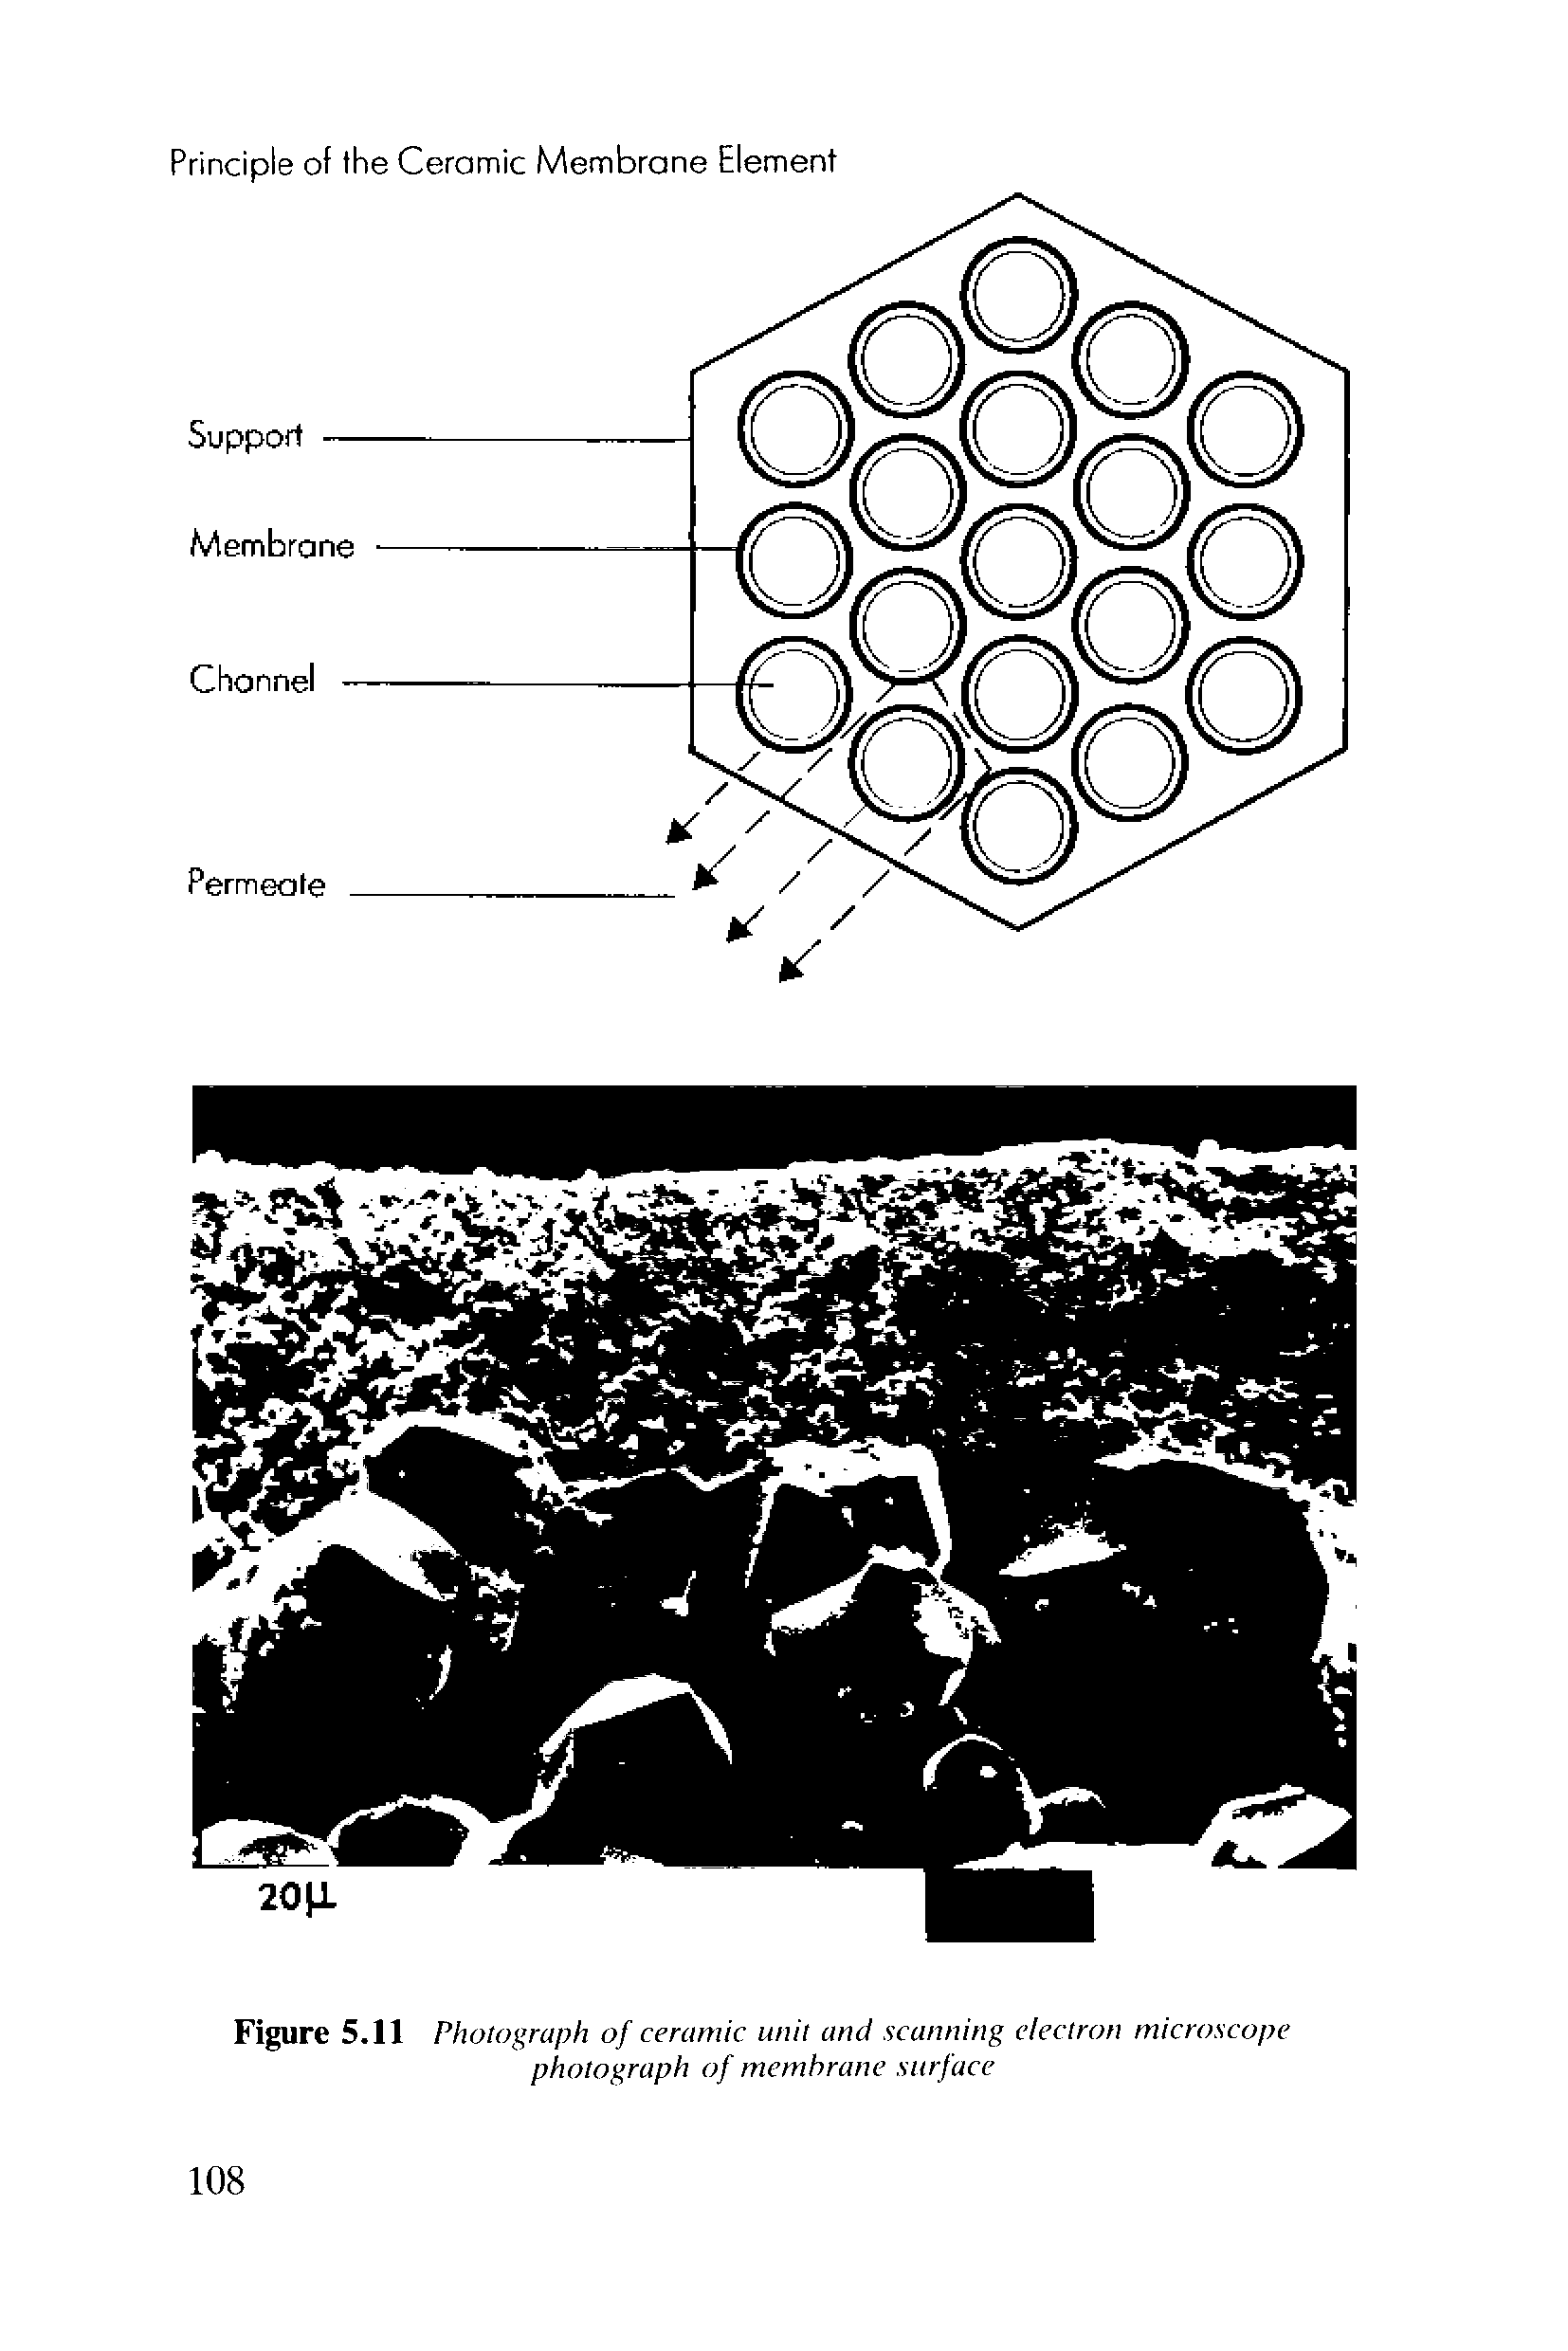 Figure 5.11 Photograph of ceramic unit and scanning electron microscope photograph of membrane surface...